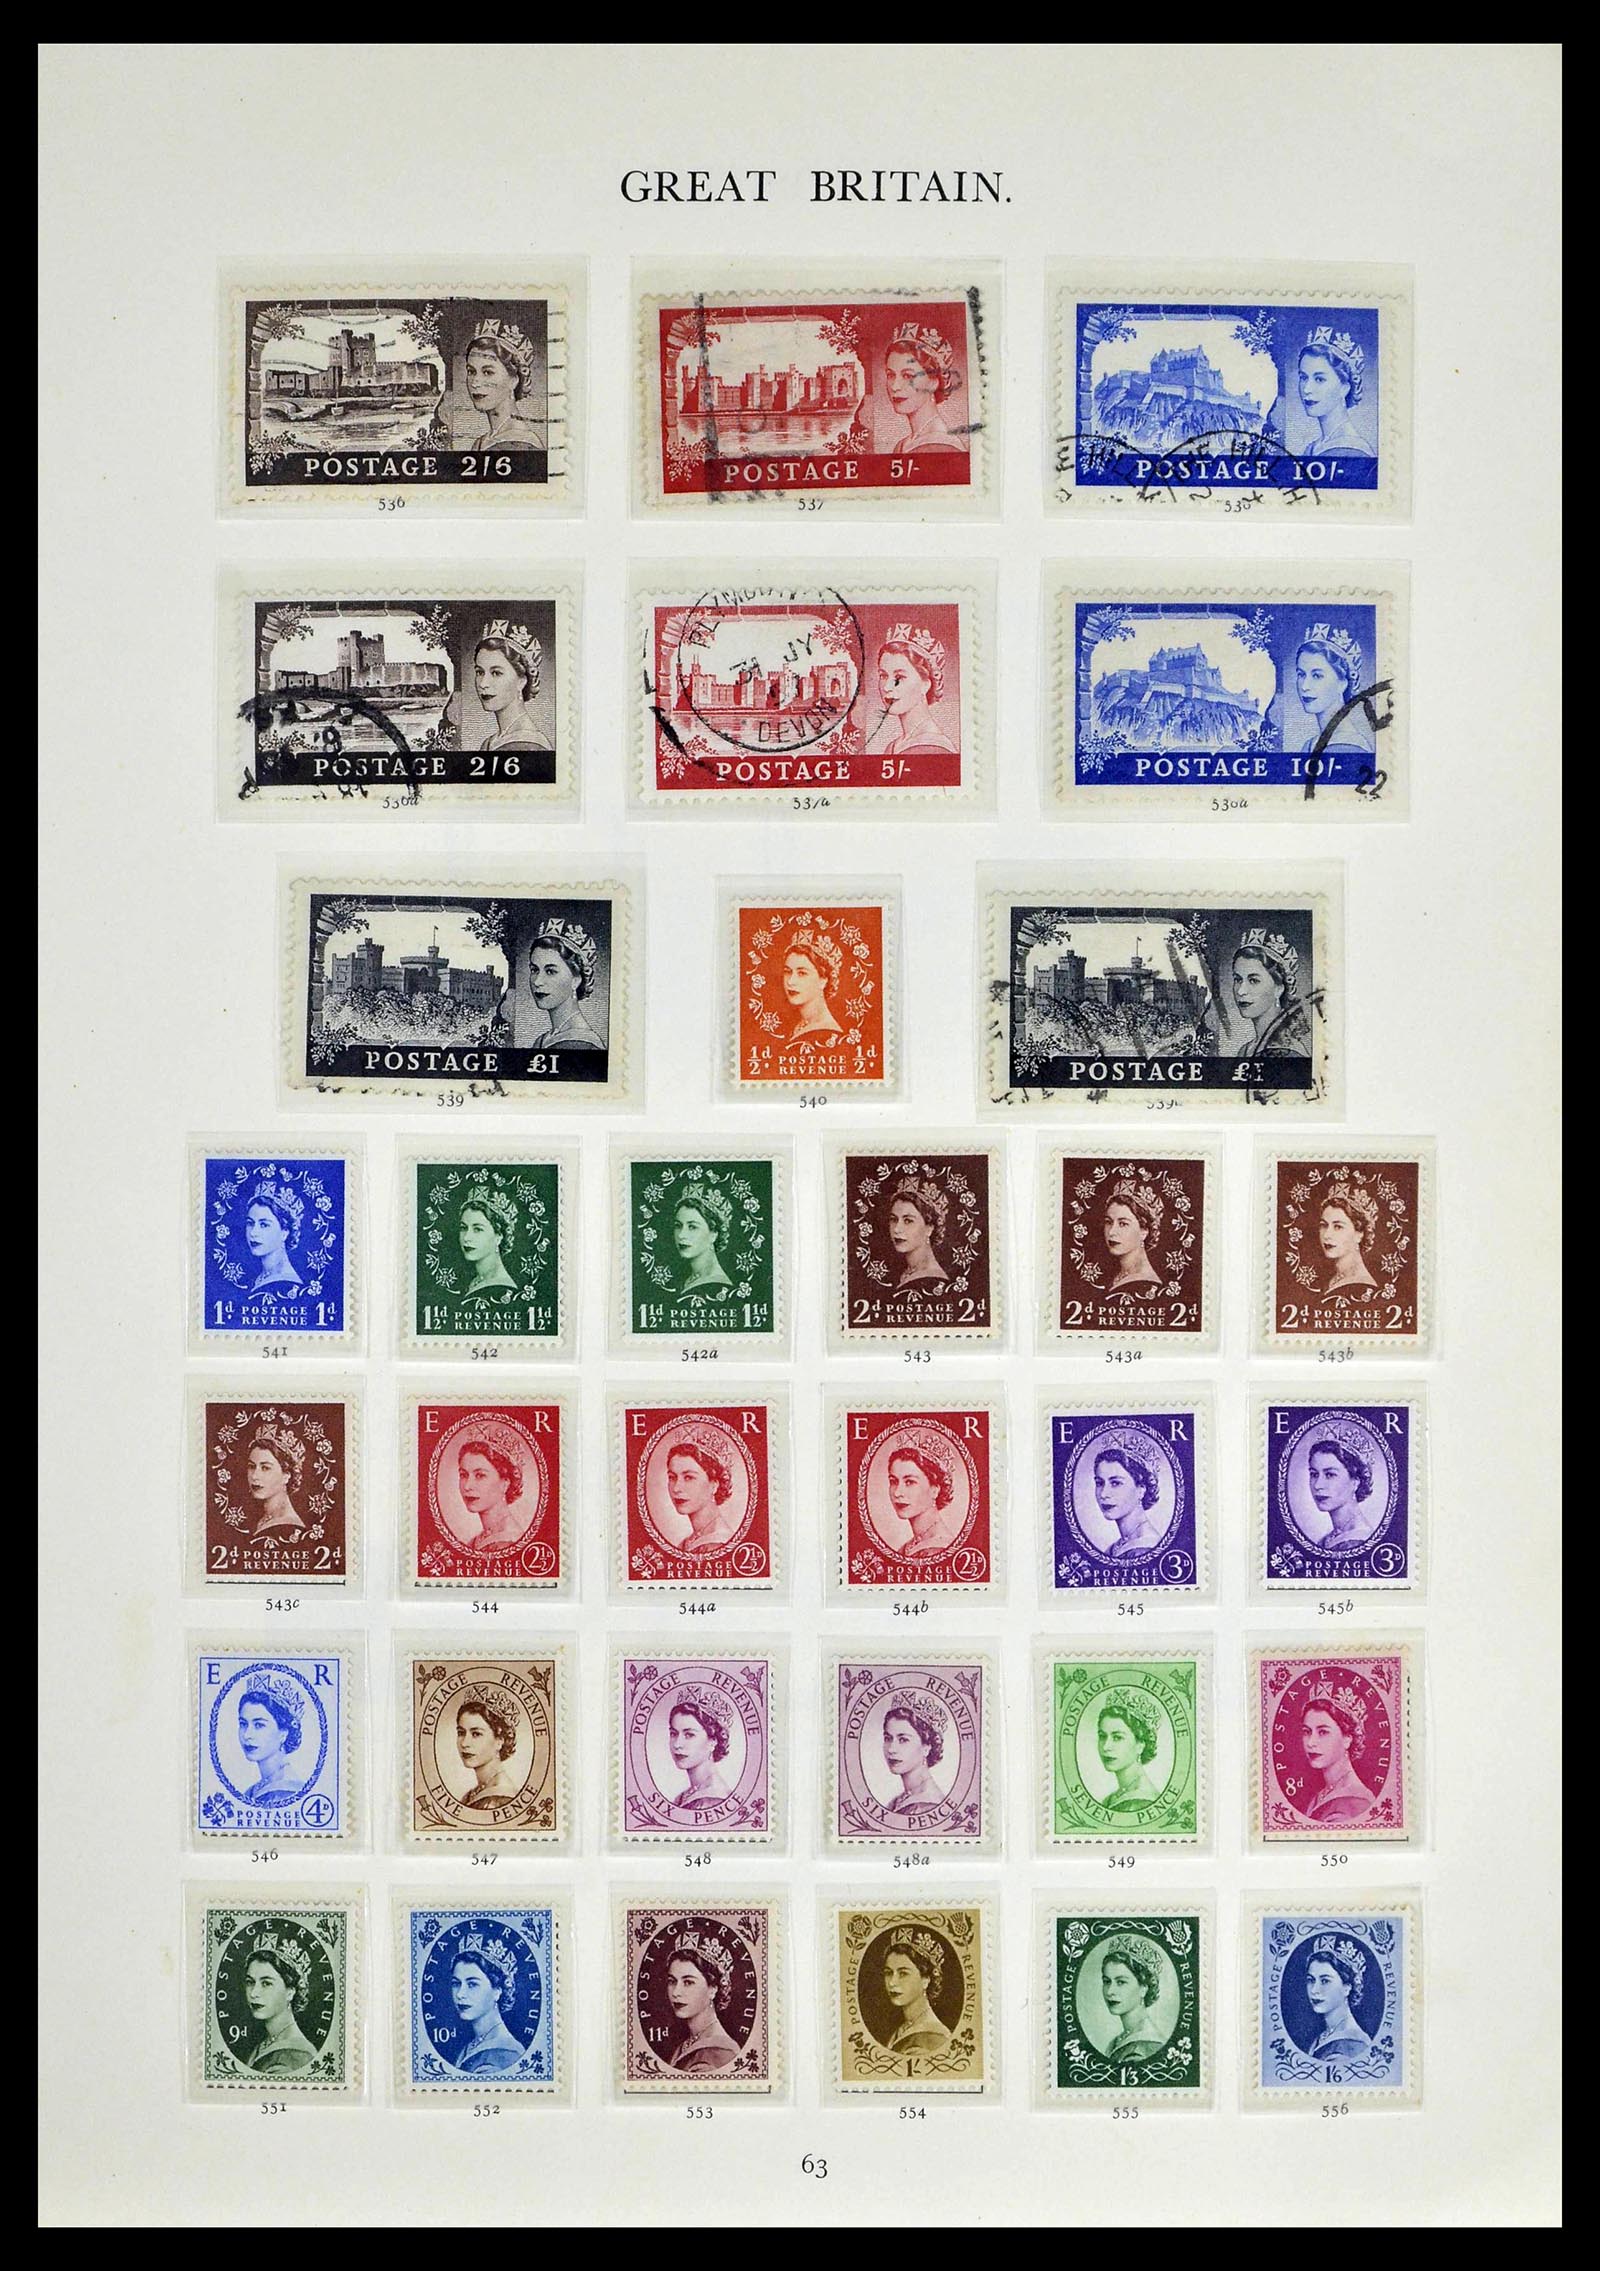 39025 0028 - Stamp collection 39025 Great Britain specialised 1840-1990.